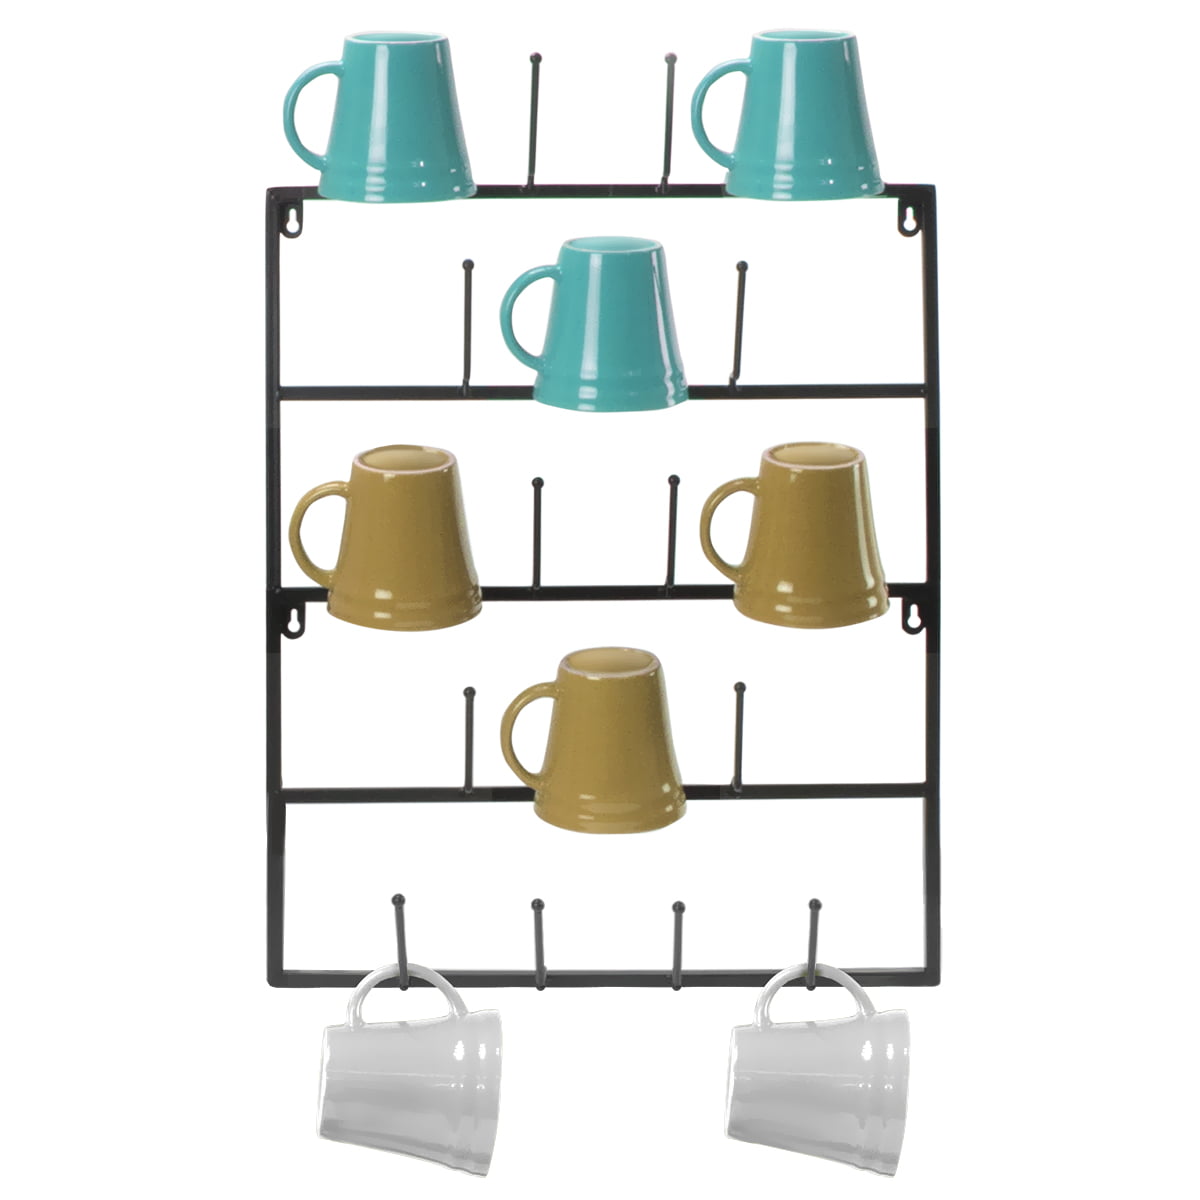 A Shutter For Hanging Coffee Mugs - The Fifth Sparrow No More